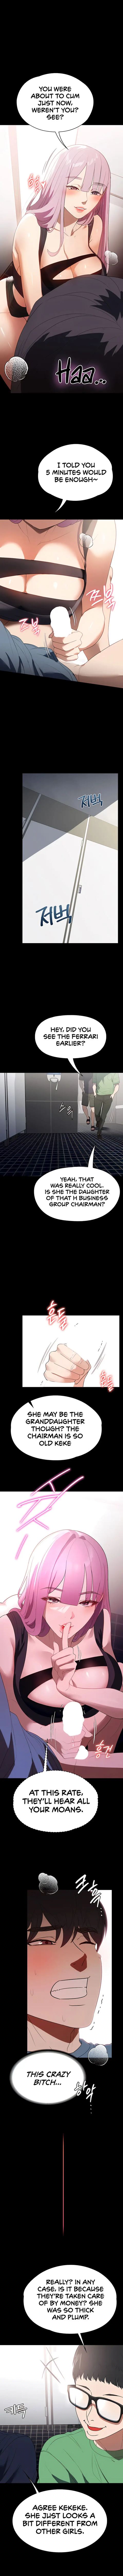 young-housemaid-chap-32-3